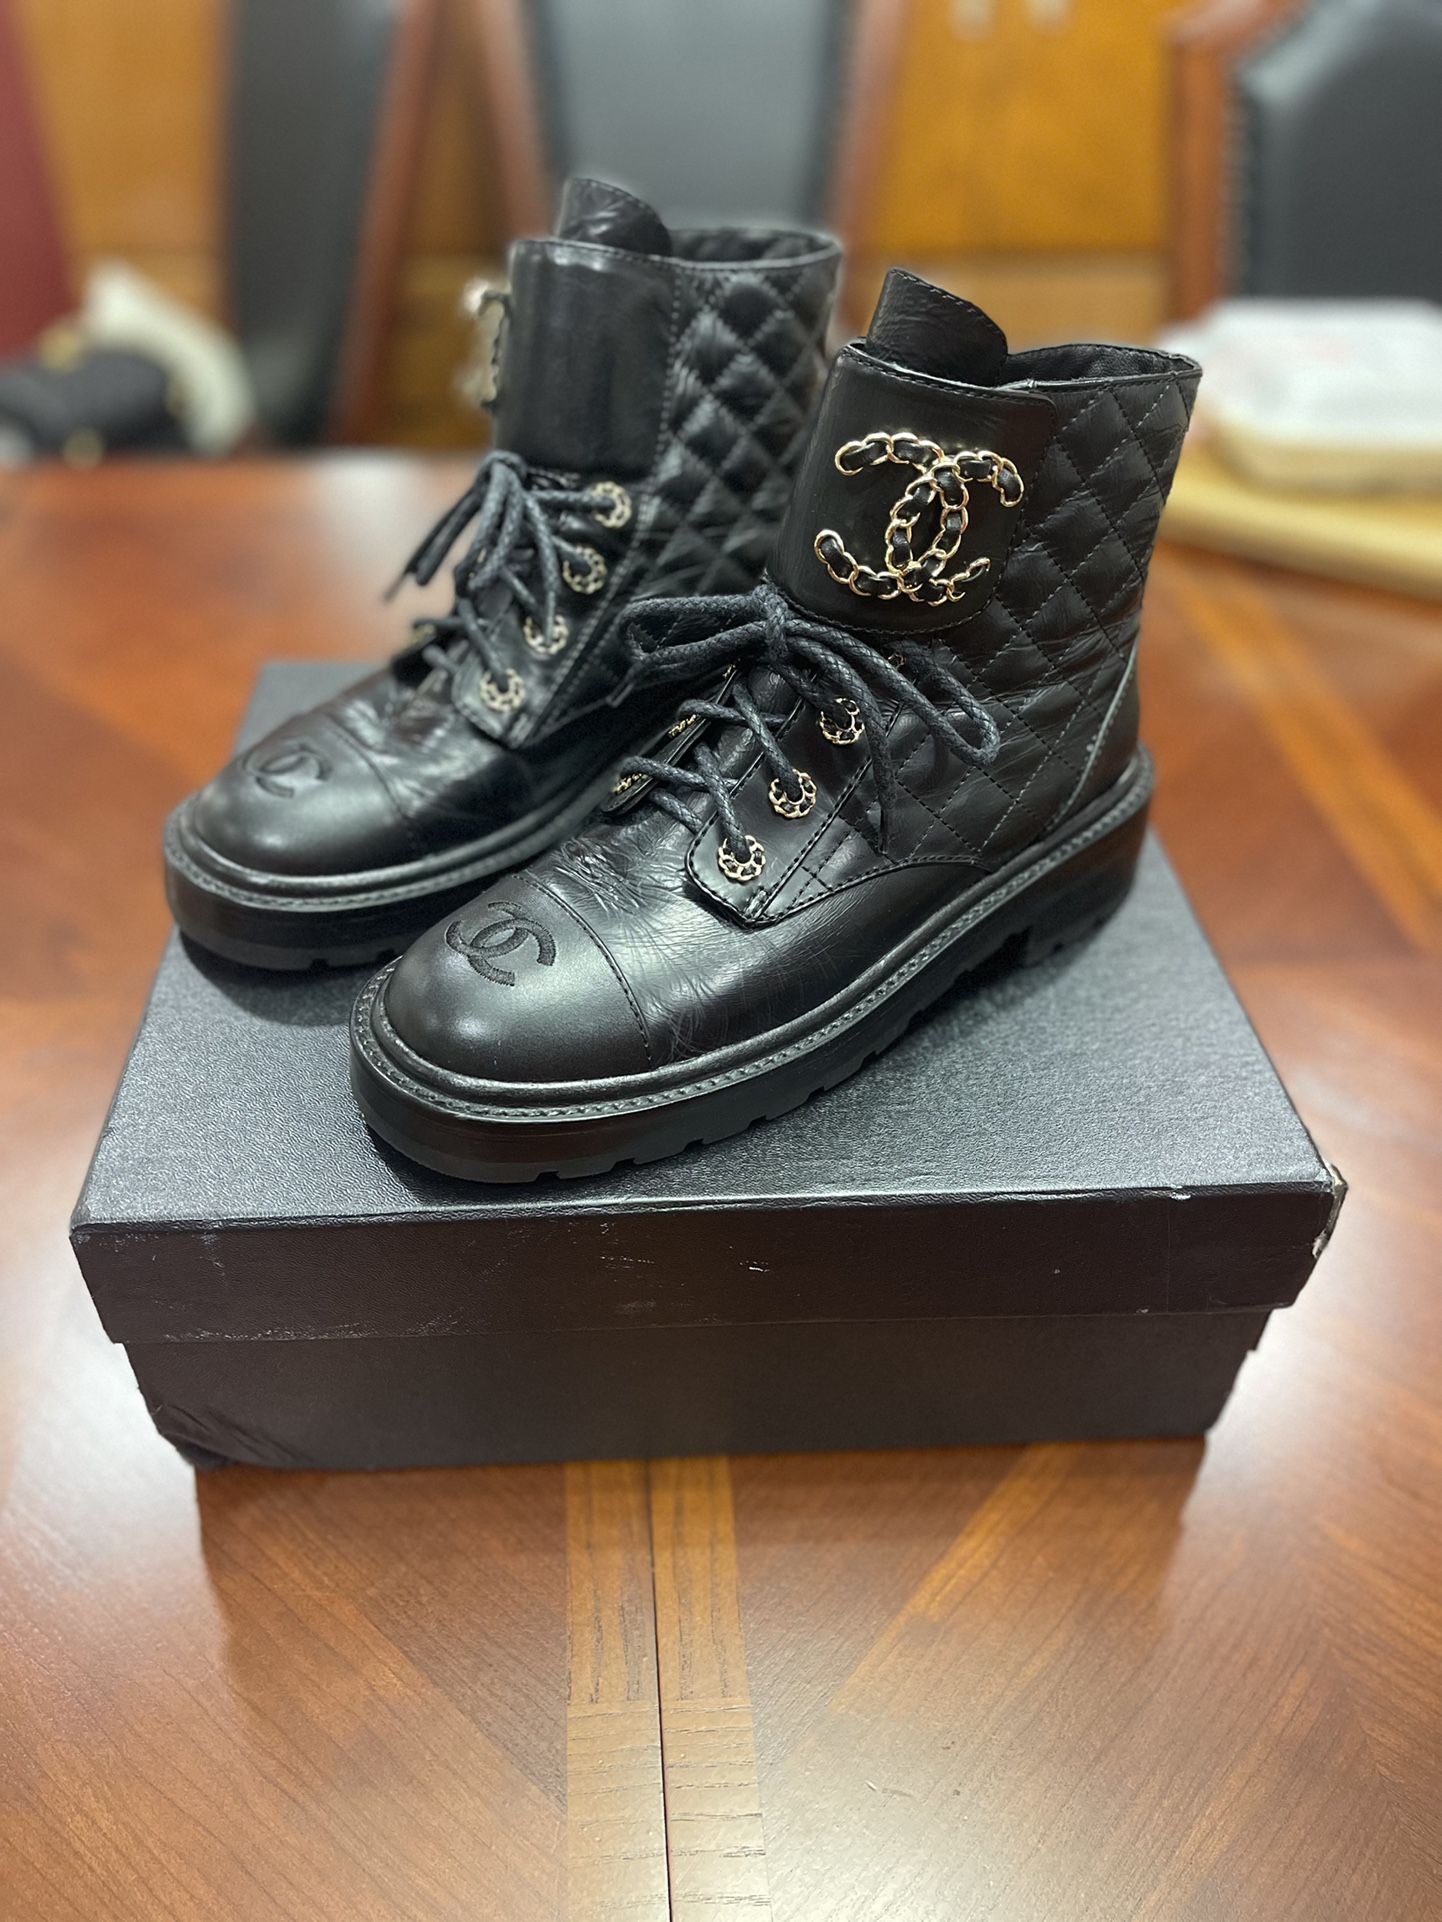 Chanel Black Leather And Knit Fabric Sock Combat Boots Size 38 Chanel